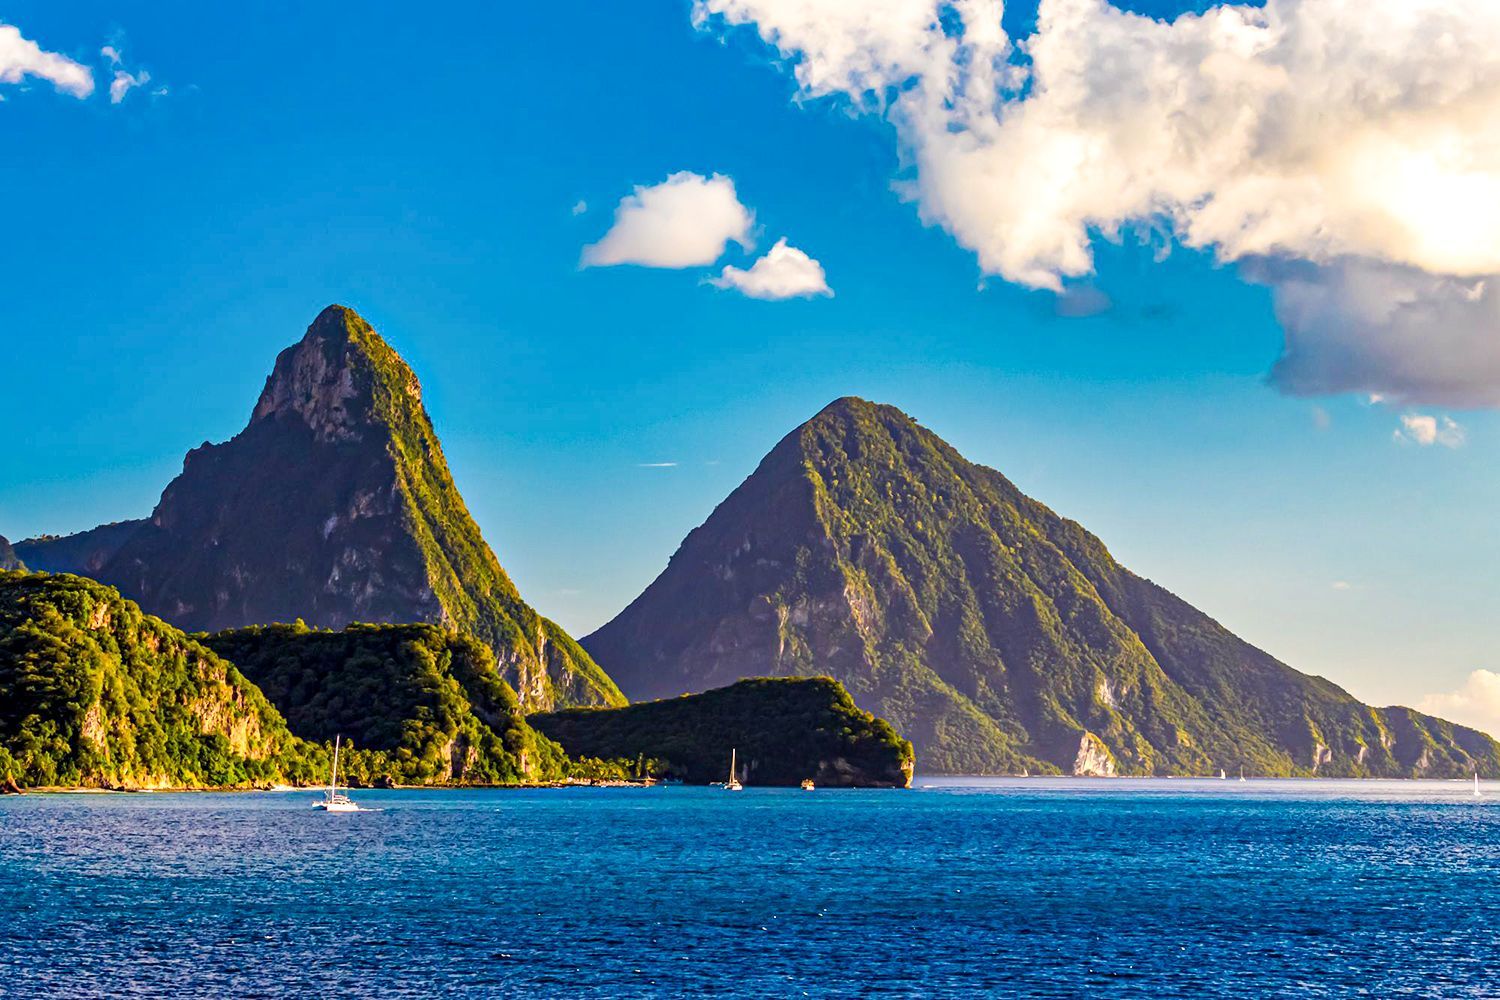 North vs South: Where To Stay In Saint Lucia?